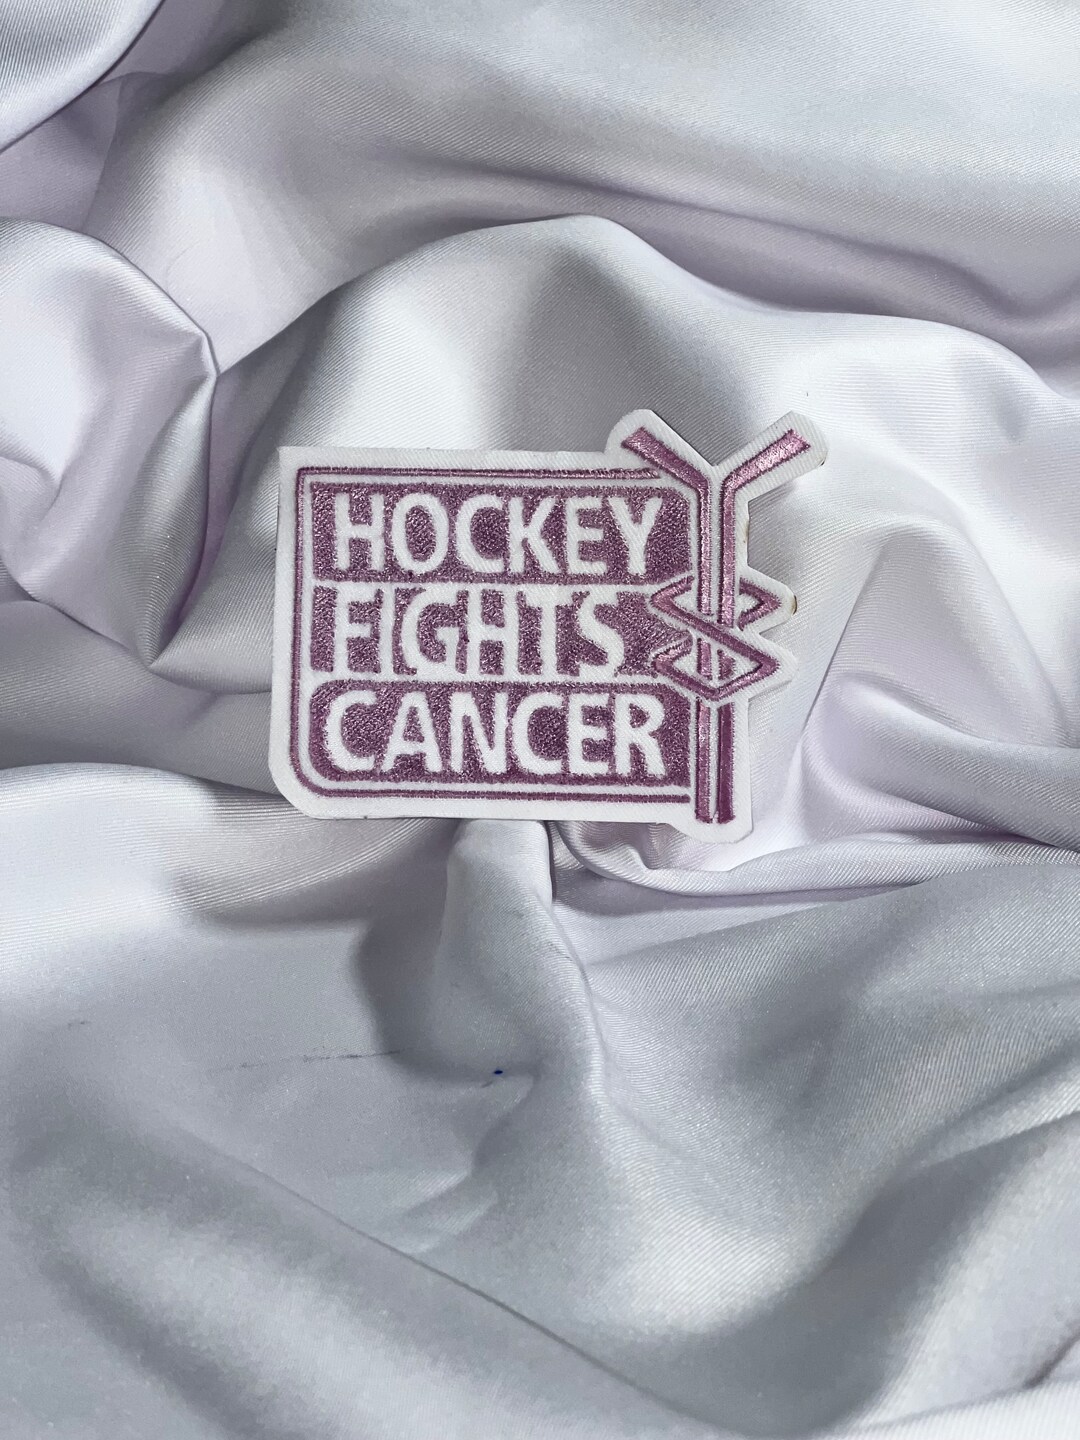 Ladies Of The Kraken Embroidered Patch - Hockey Fight Cancer Color